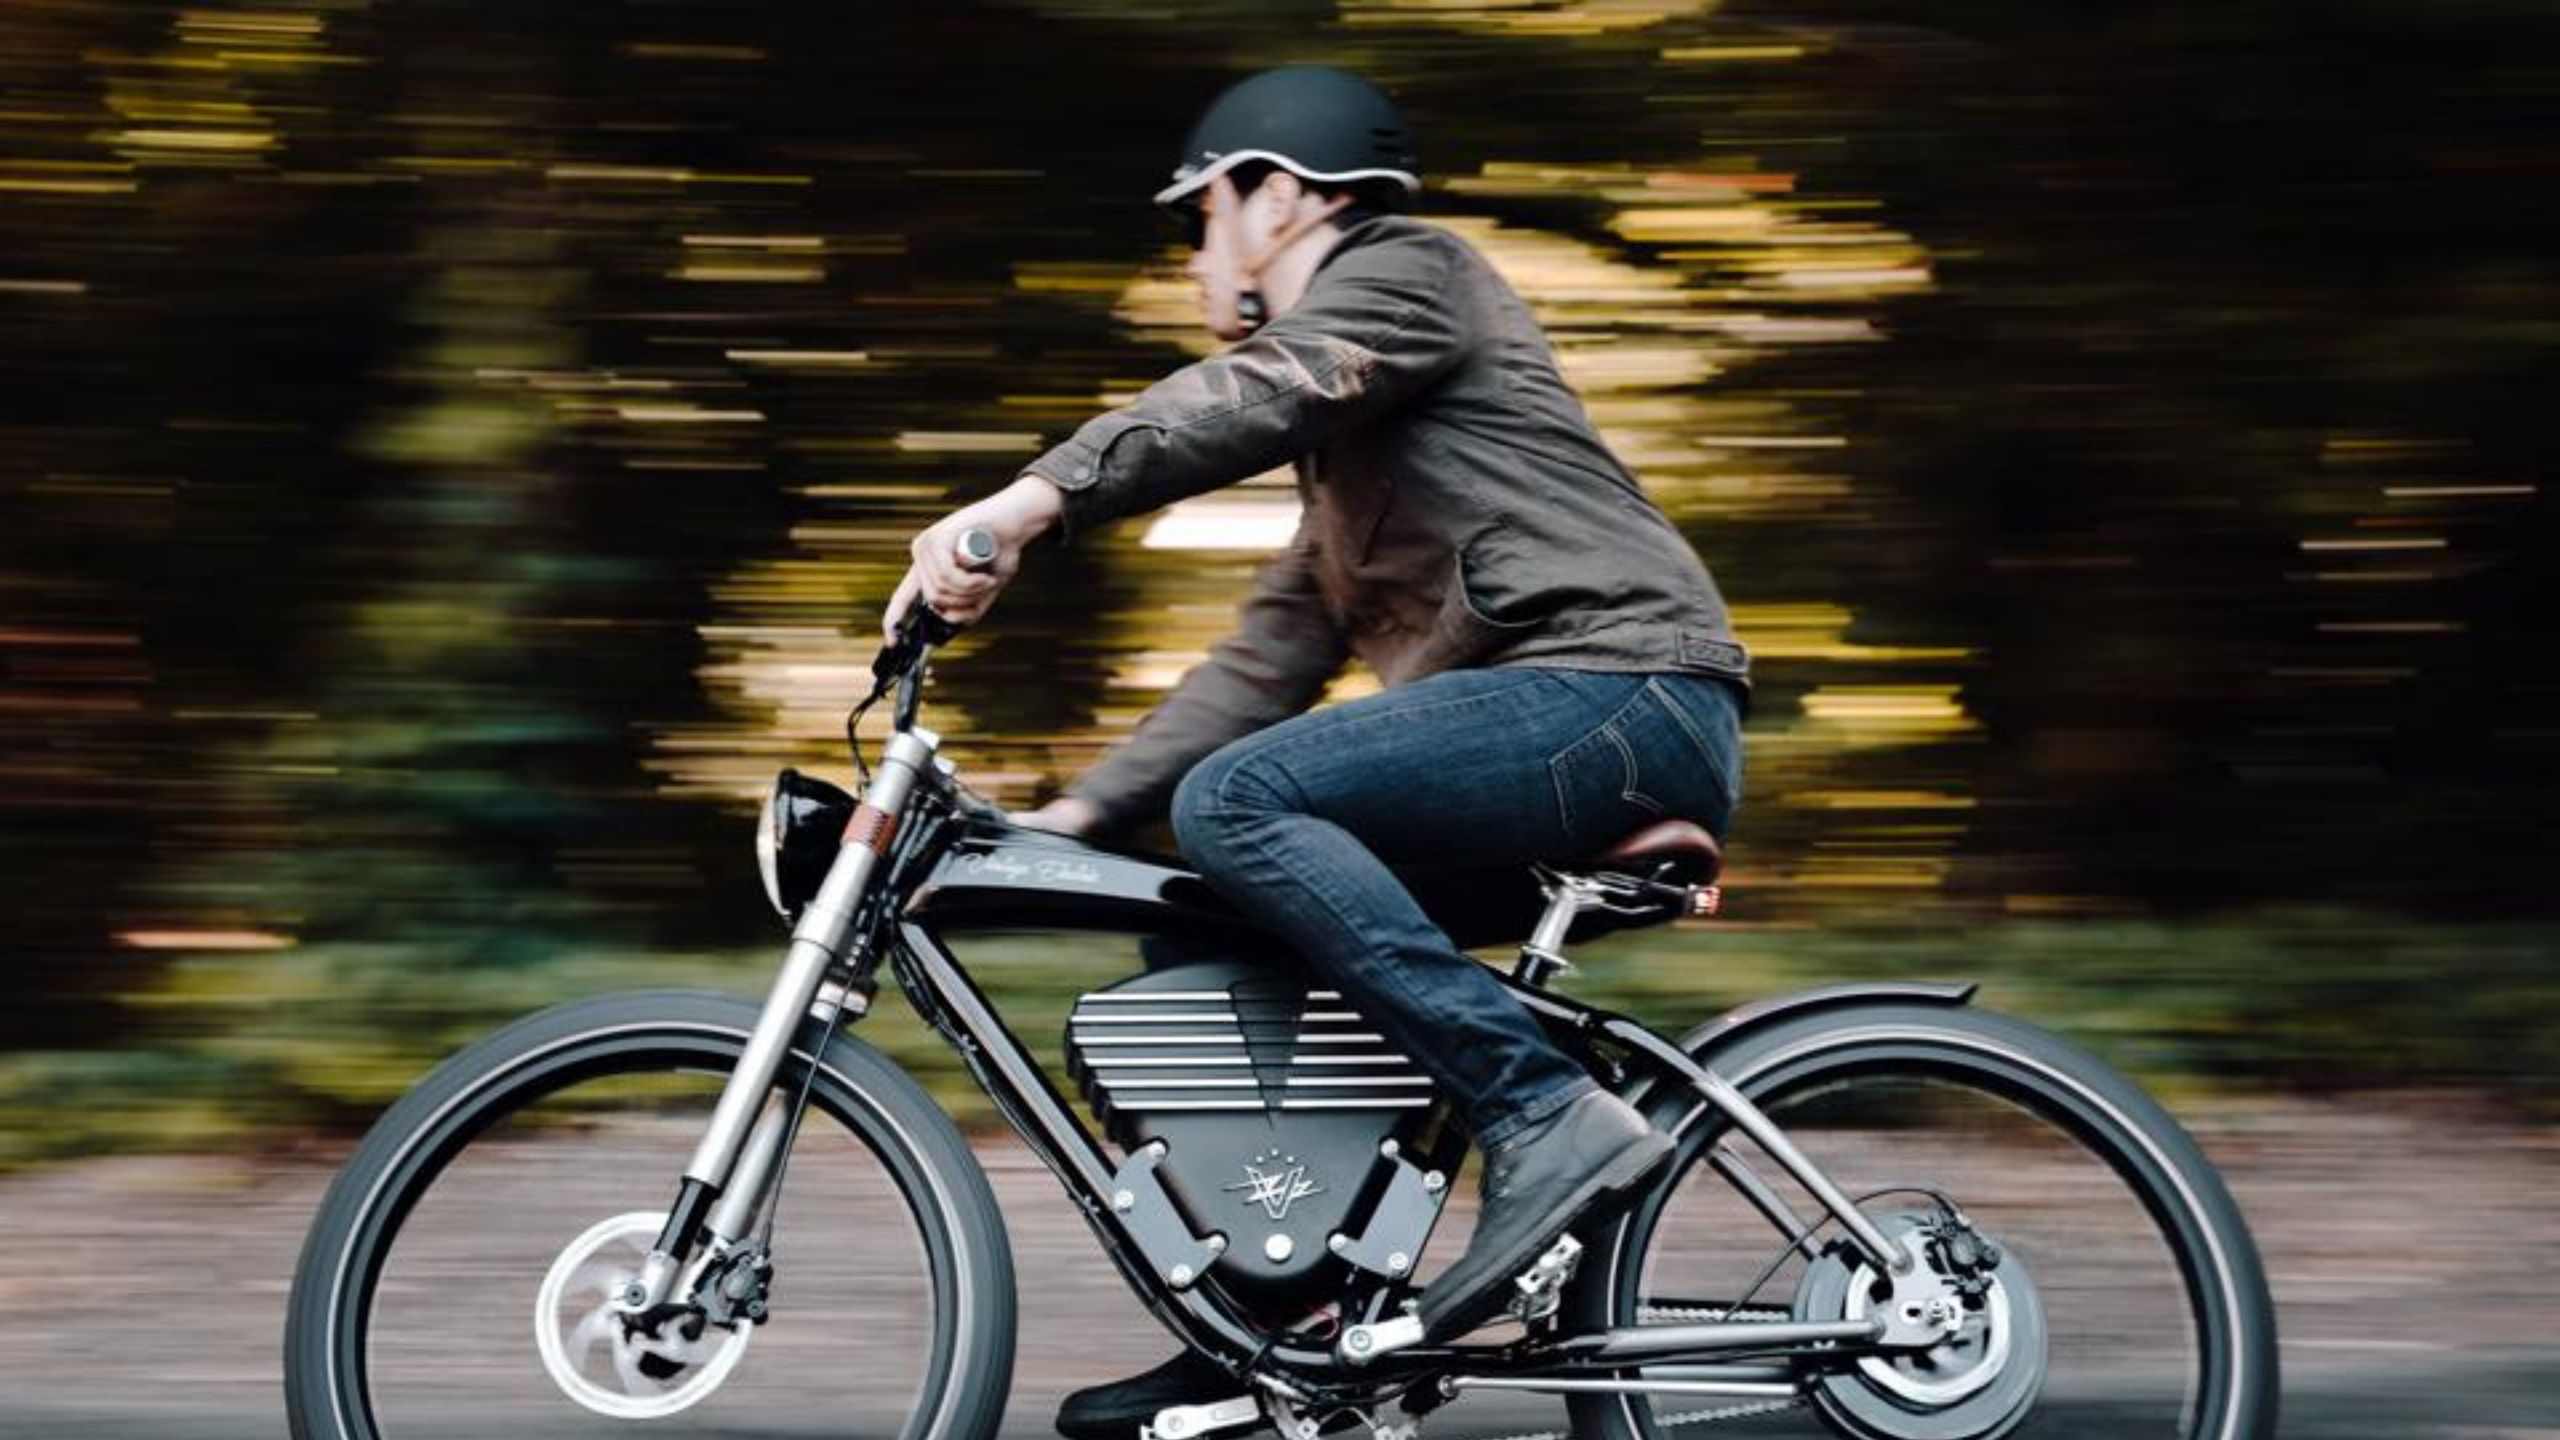 what makes the ebike so expensive?